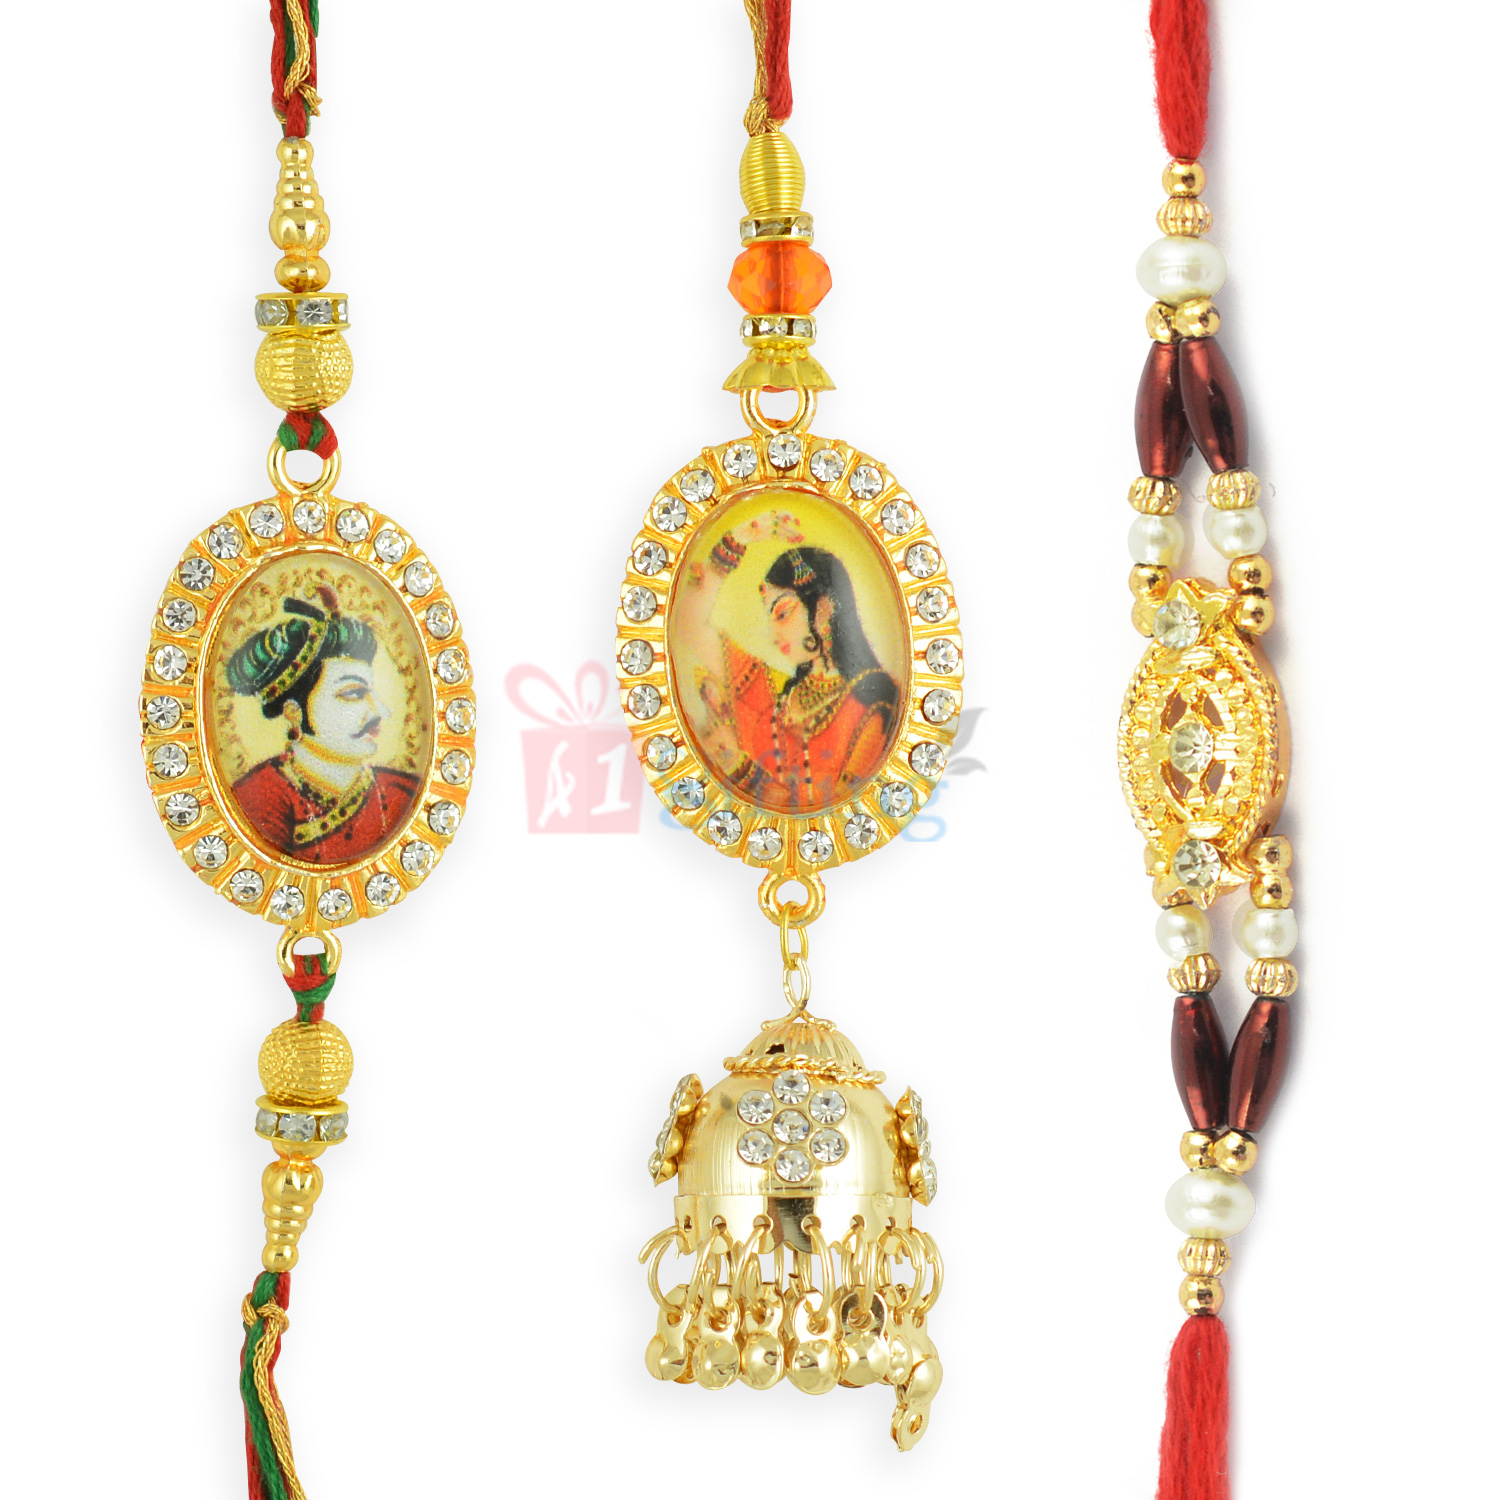 Impressive 3 Rakhi Set of King and Queen with Golden Stone Work